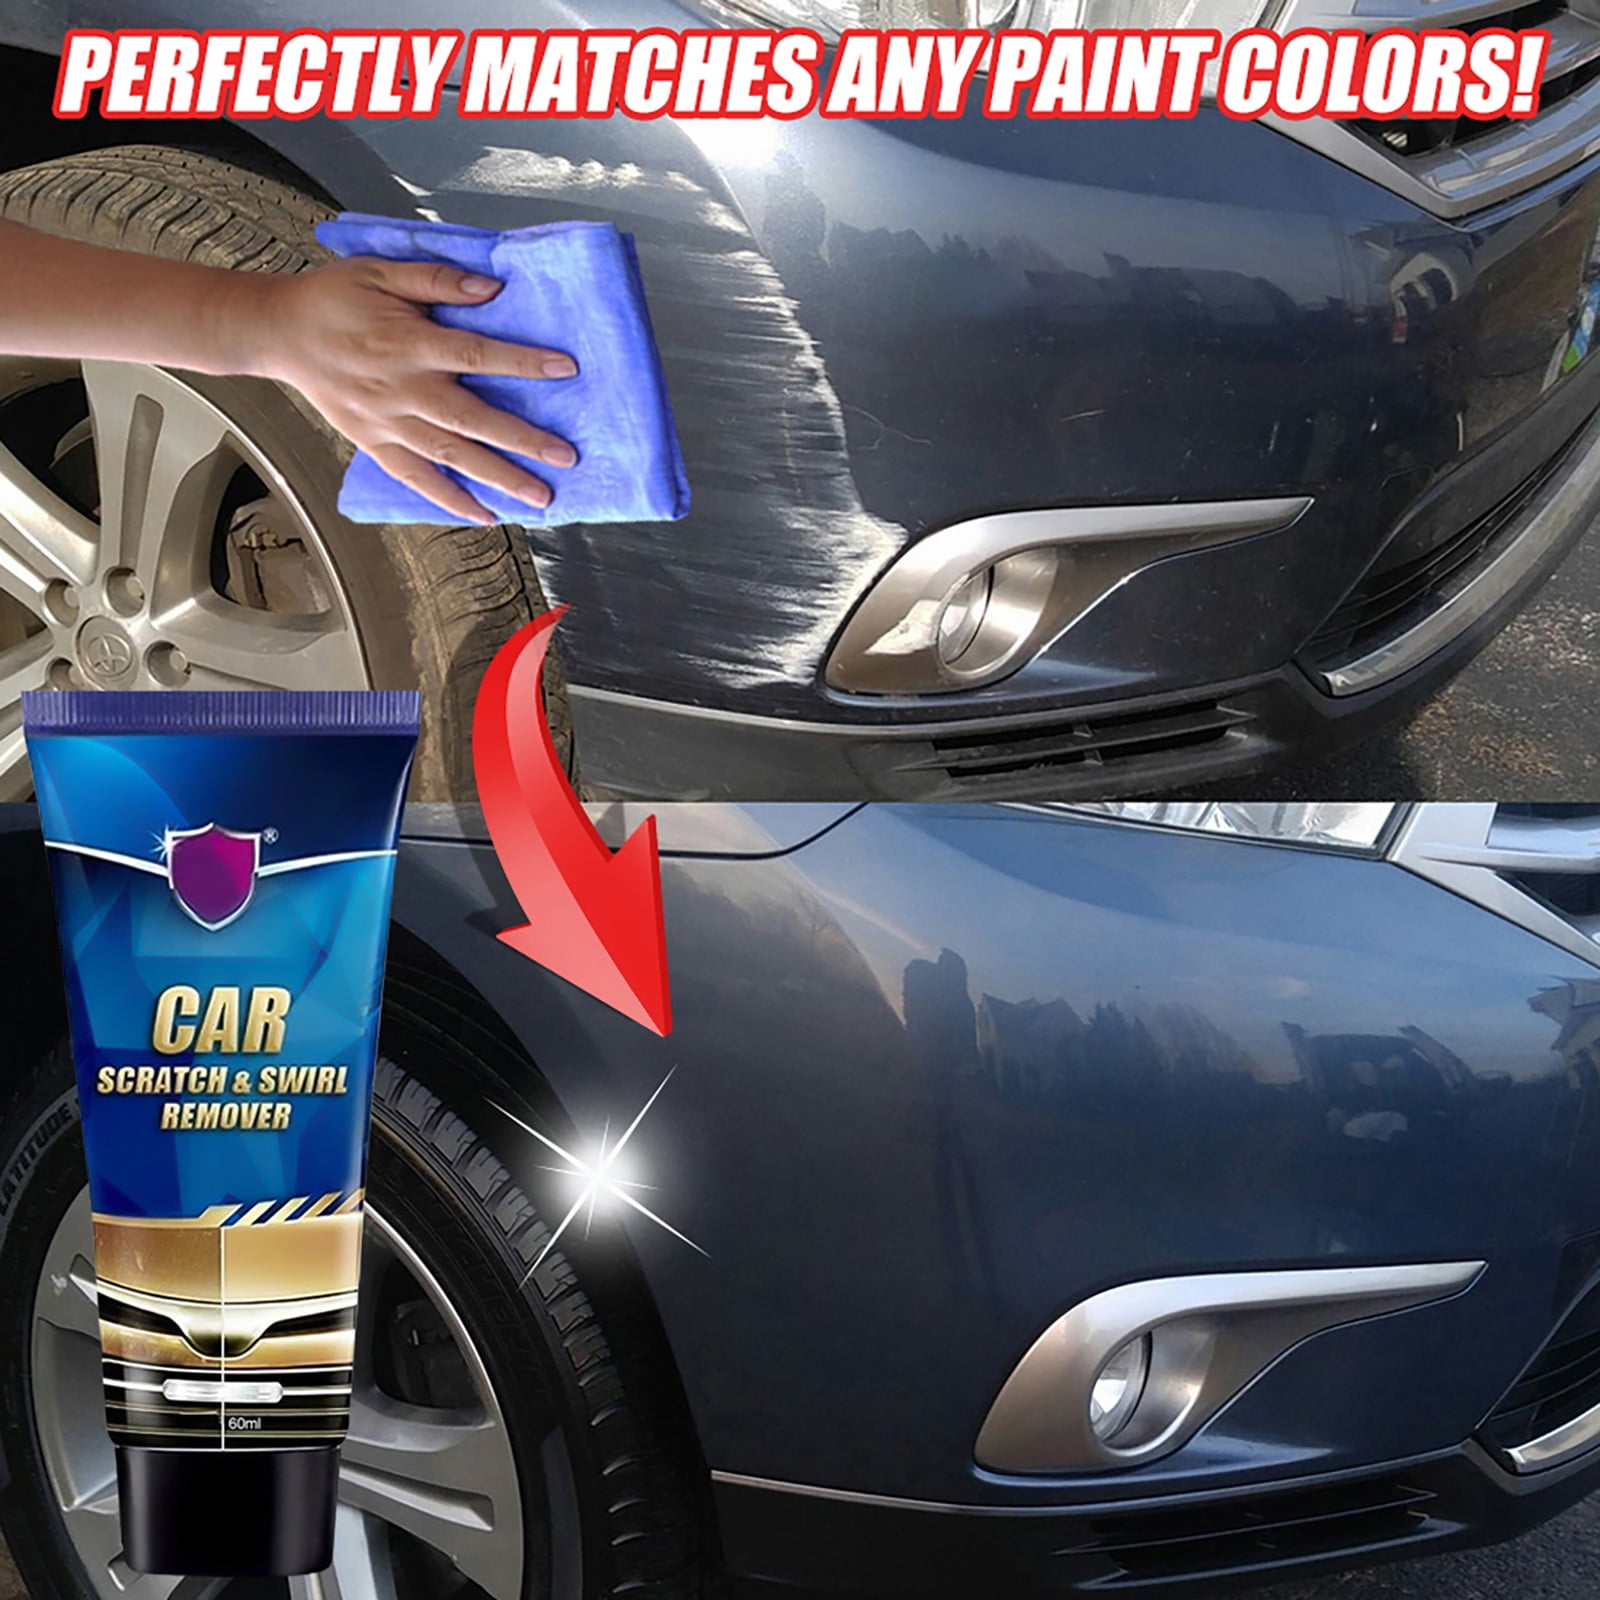  LiME LiNE 4 Rotary Palm Polisher, Automotive Clearcoat swirl  mark remover : Automotive